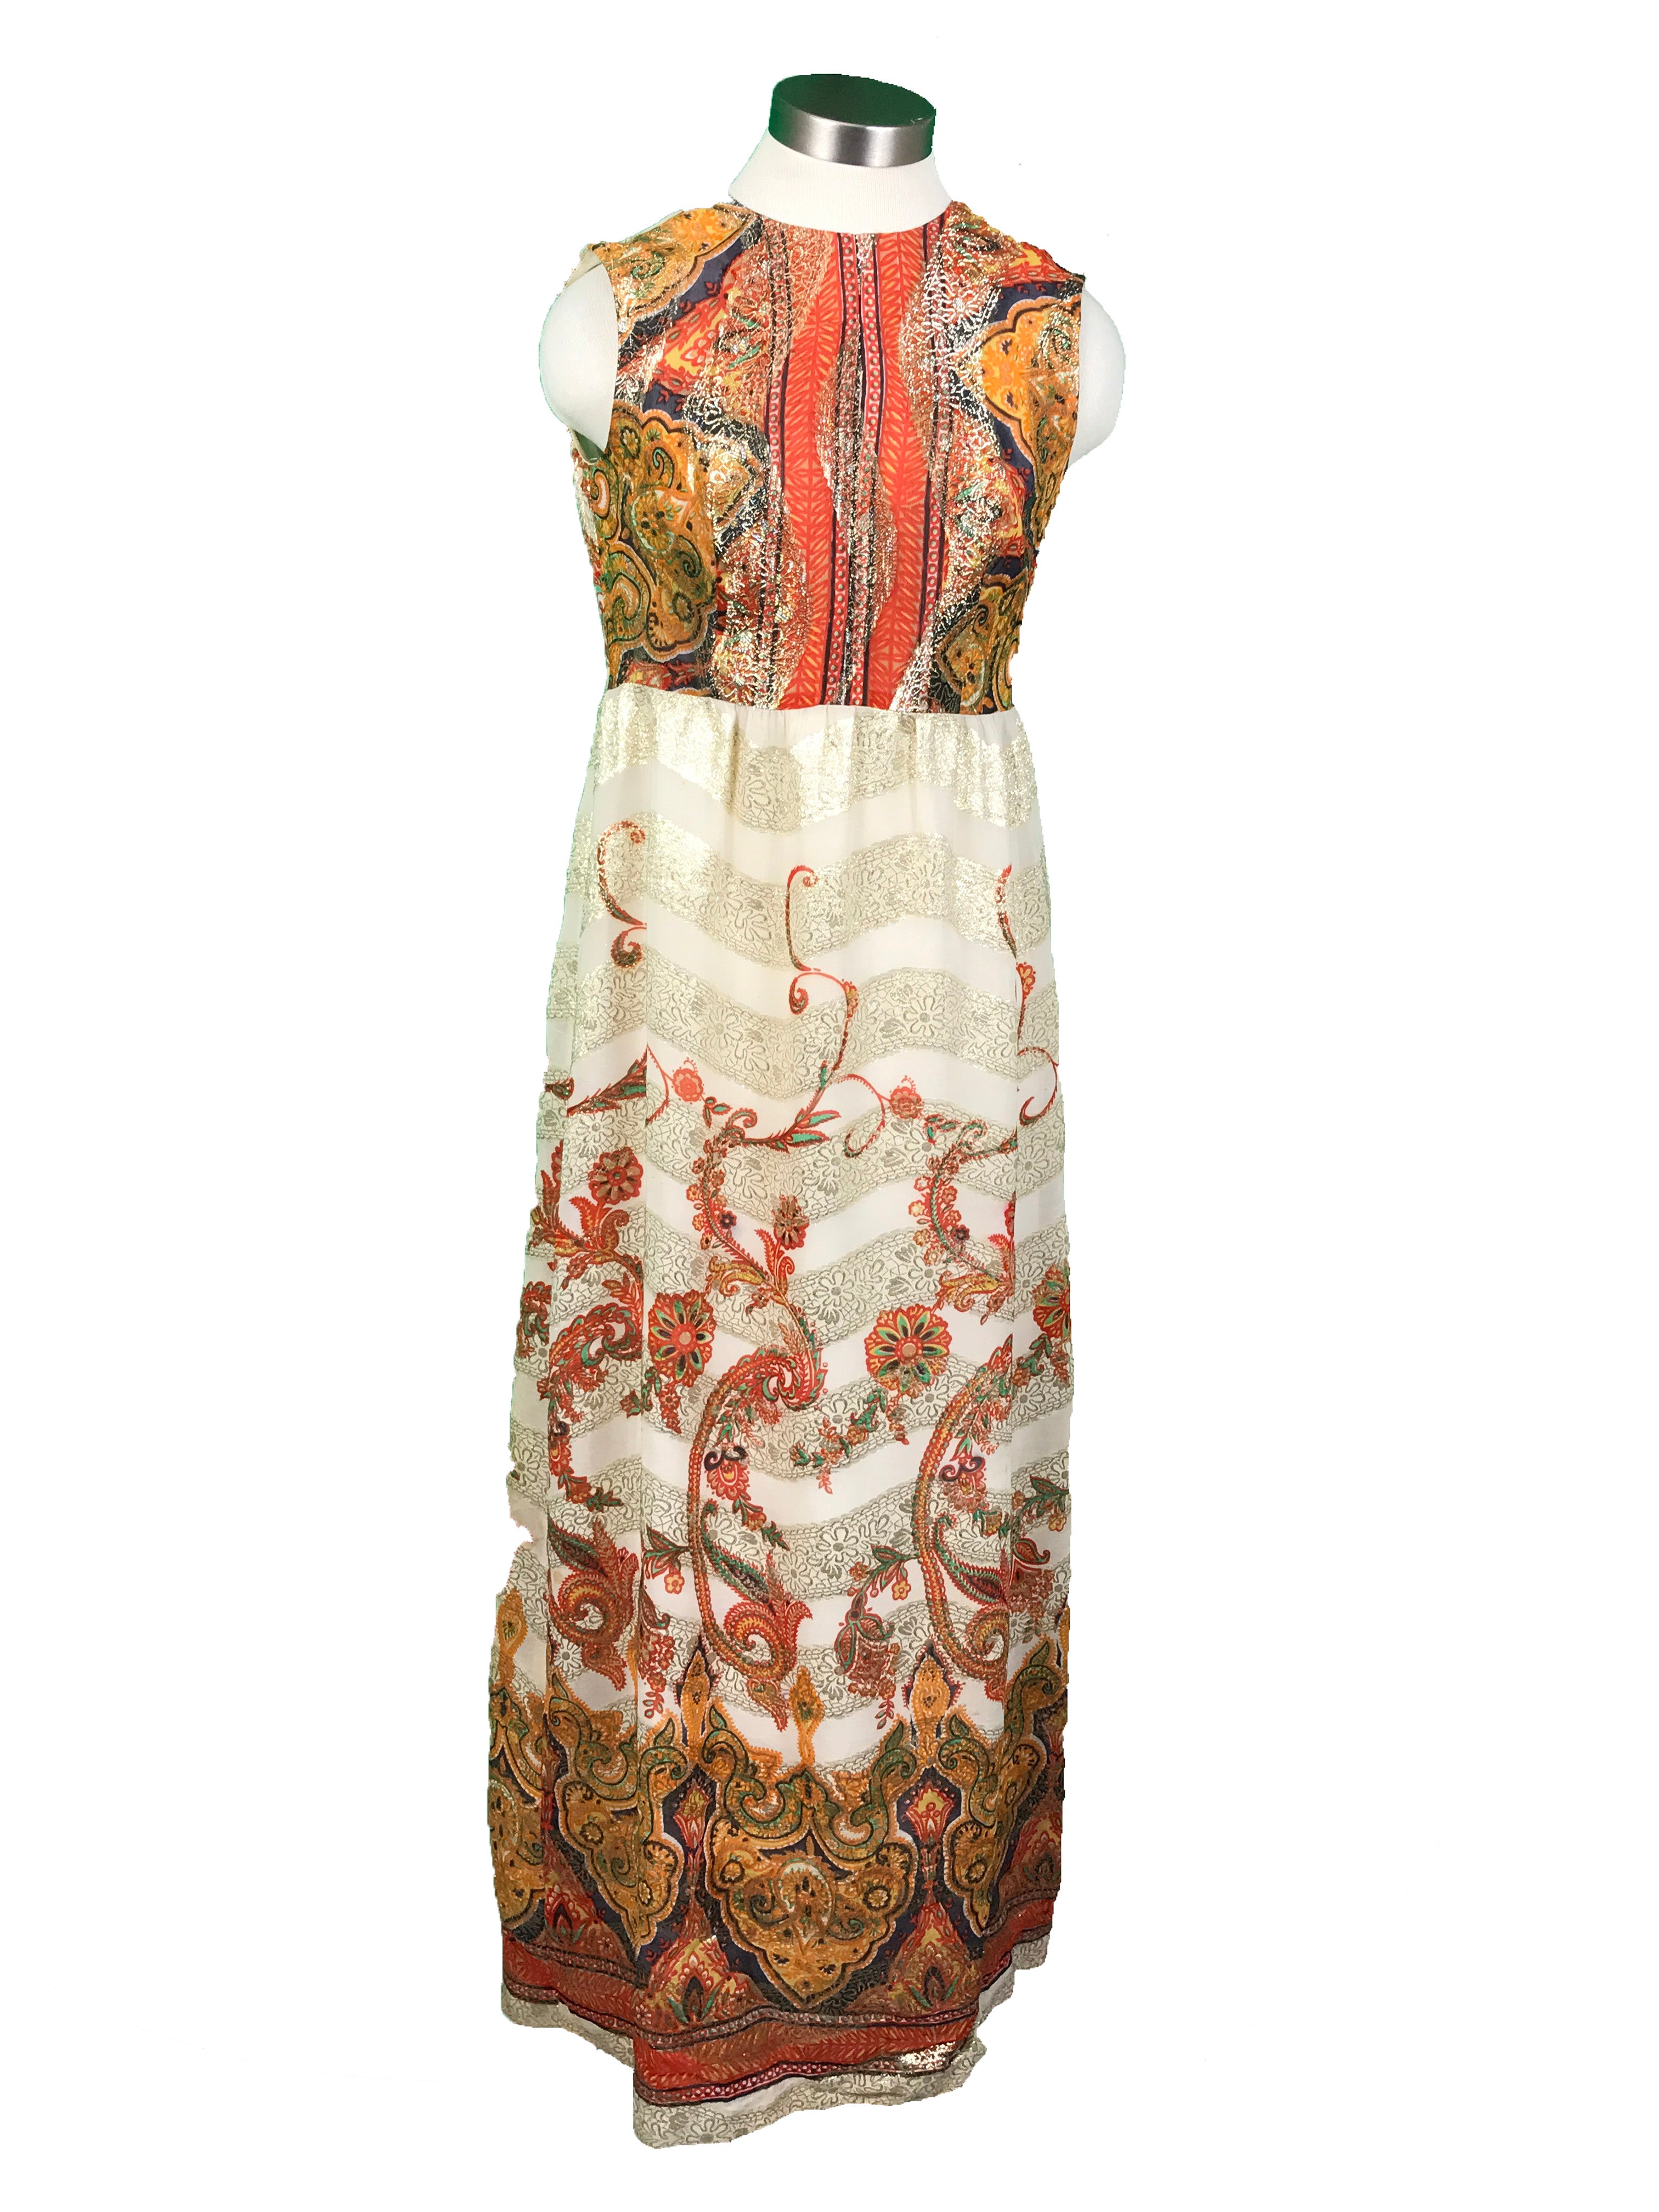 Vintage Floor Length Women's Paisley Dress with Gold Detailing